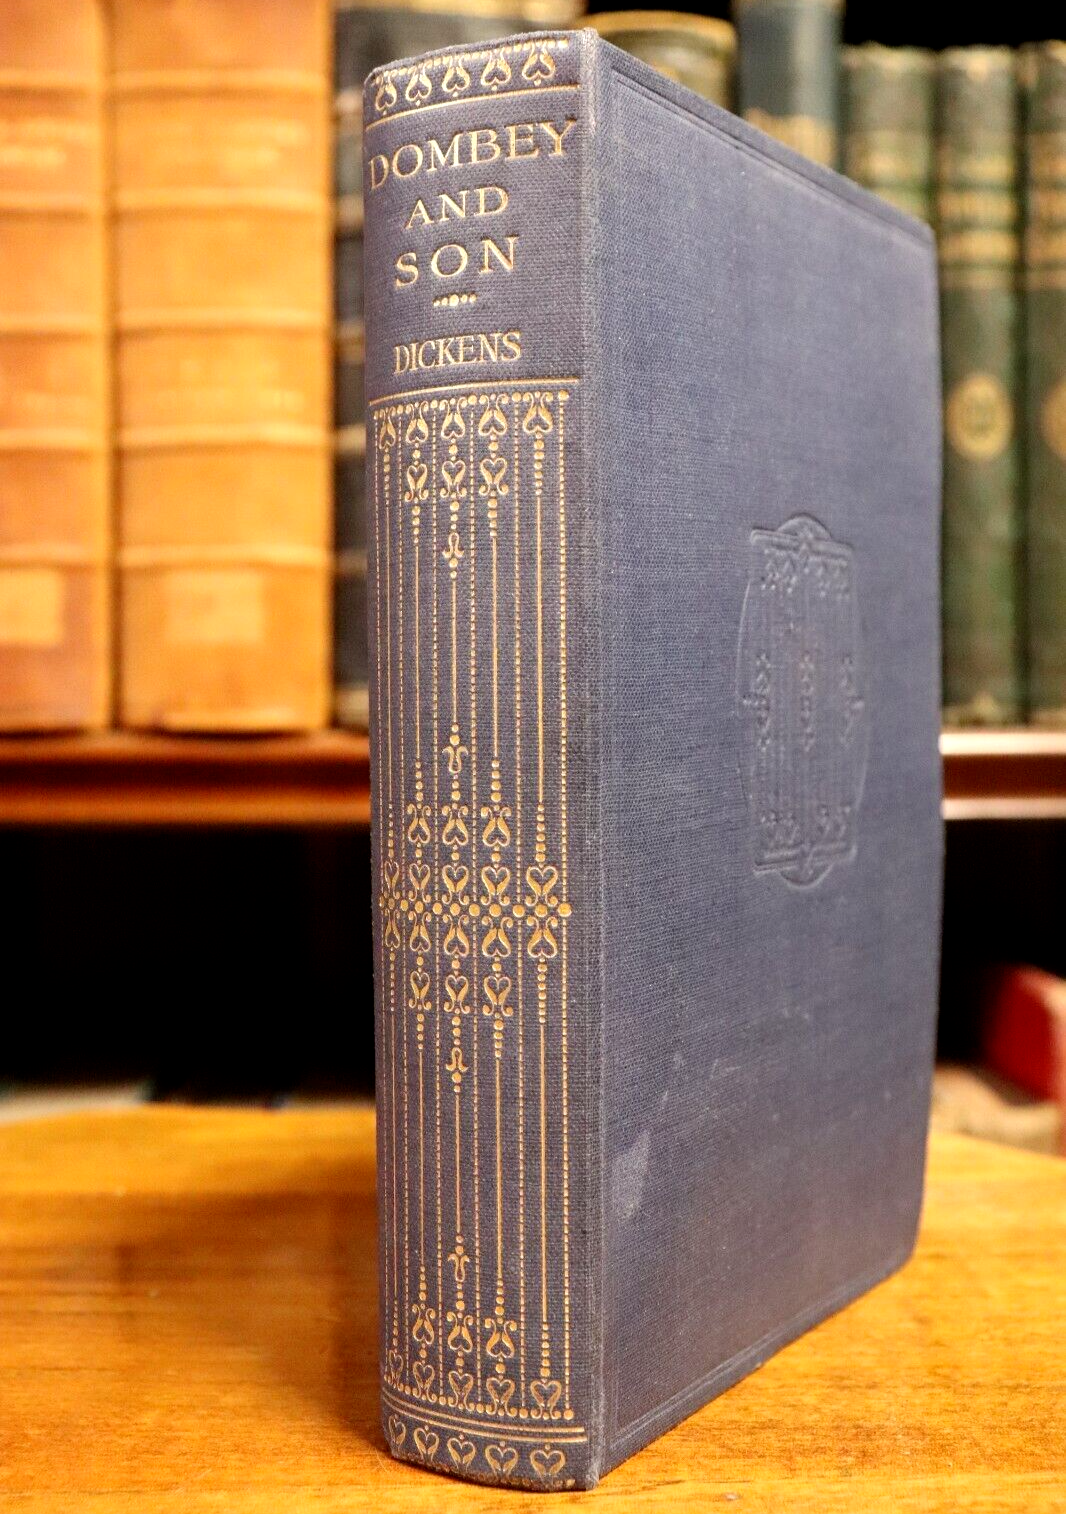 c1960 Dombey & Son by Charles Dickens Vintage Literature Book